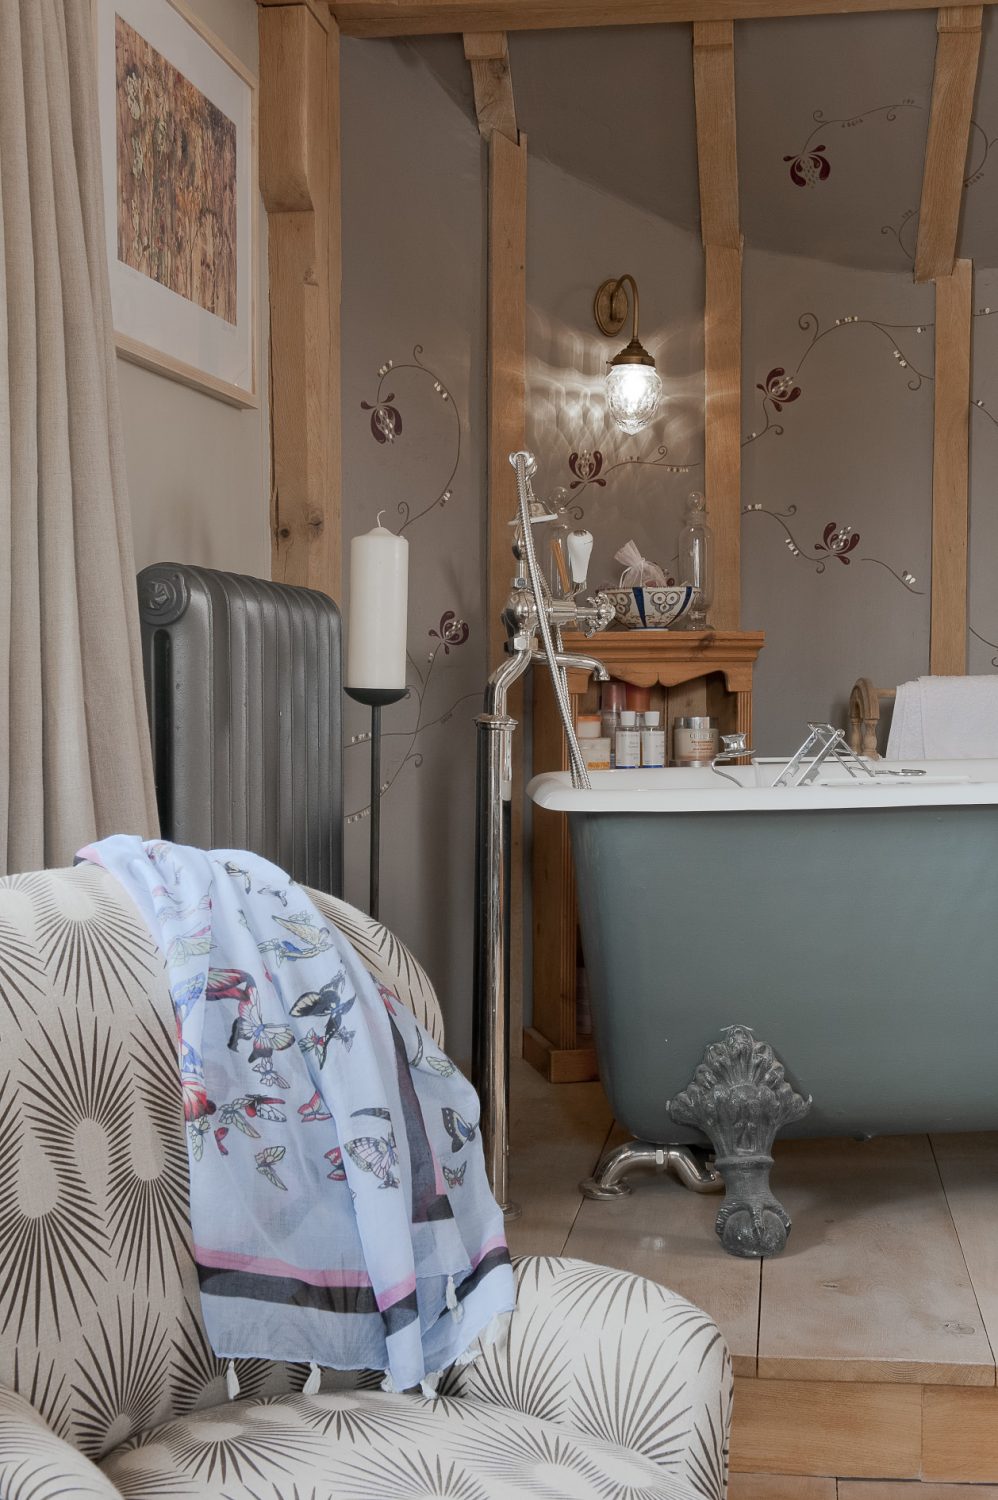 In Moyna and Richard’s room a handsome rolltop bath is mounted on a dais in one corner